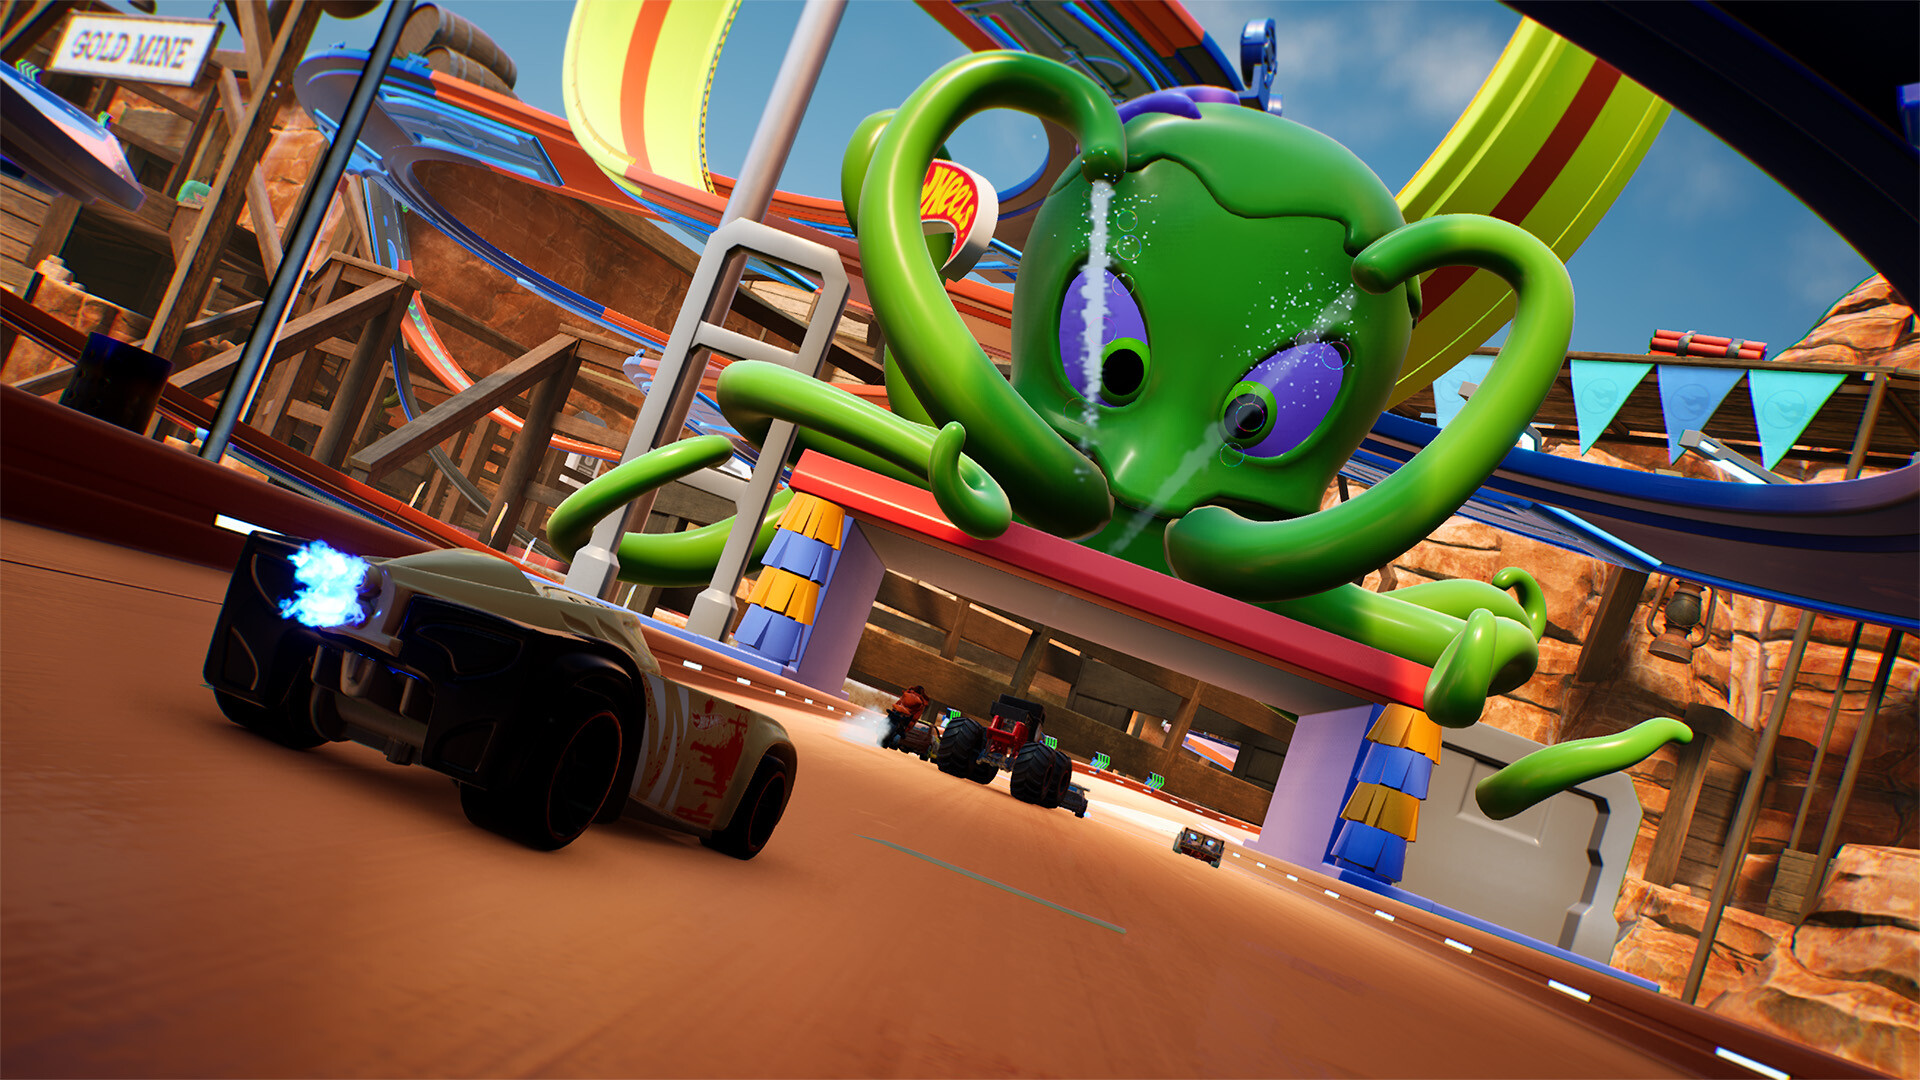 In Hot Wheels Unleashed 2 the player drives towards an octopus boss.